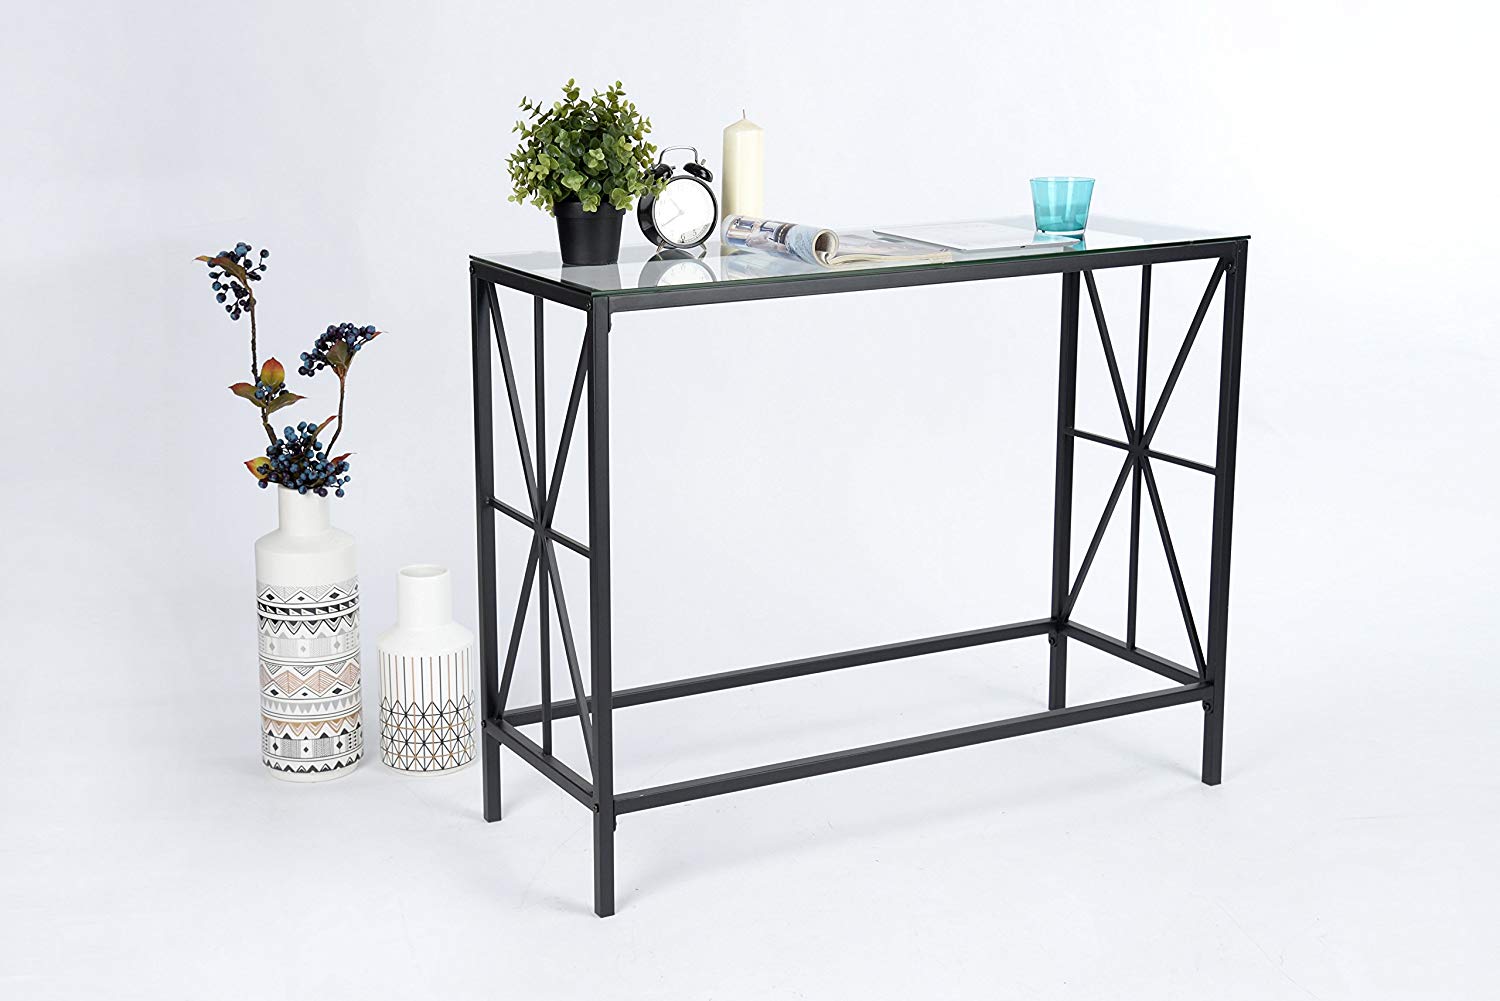 black metal frame clear tempered glass design chrome accent console sofa table with shelf kitchen dining uma kmart diy coffee mini lamps floral lamp grey nest tables laminate